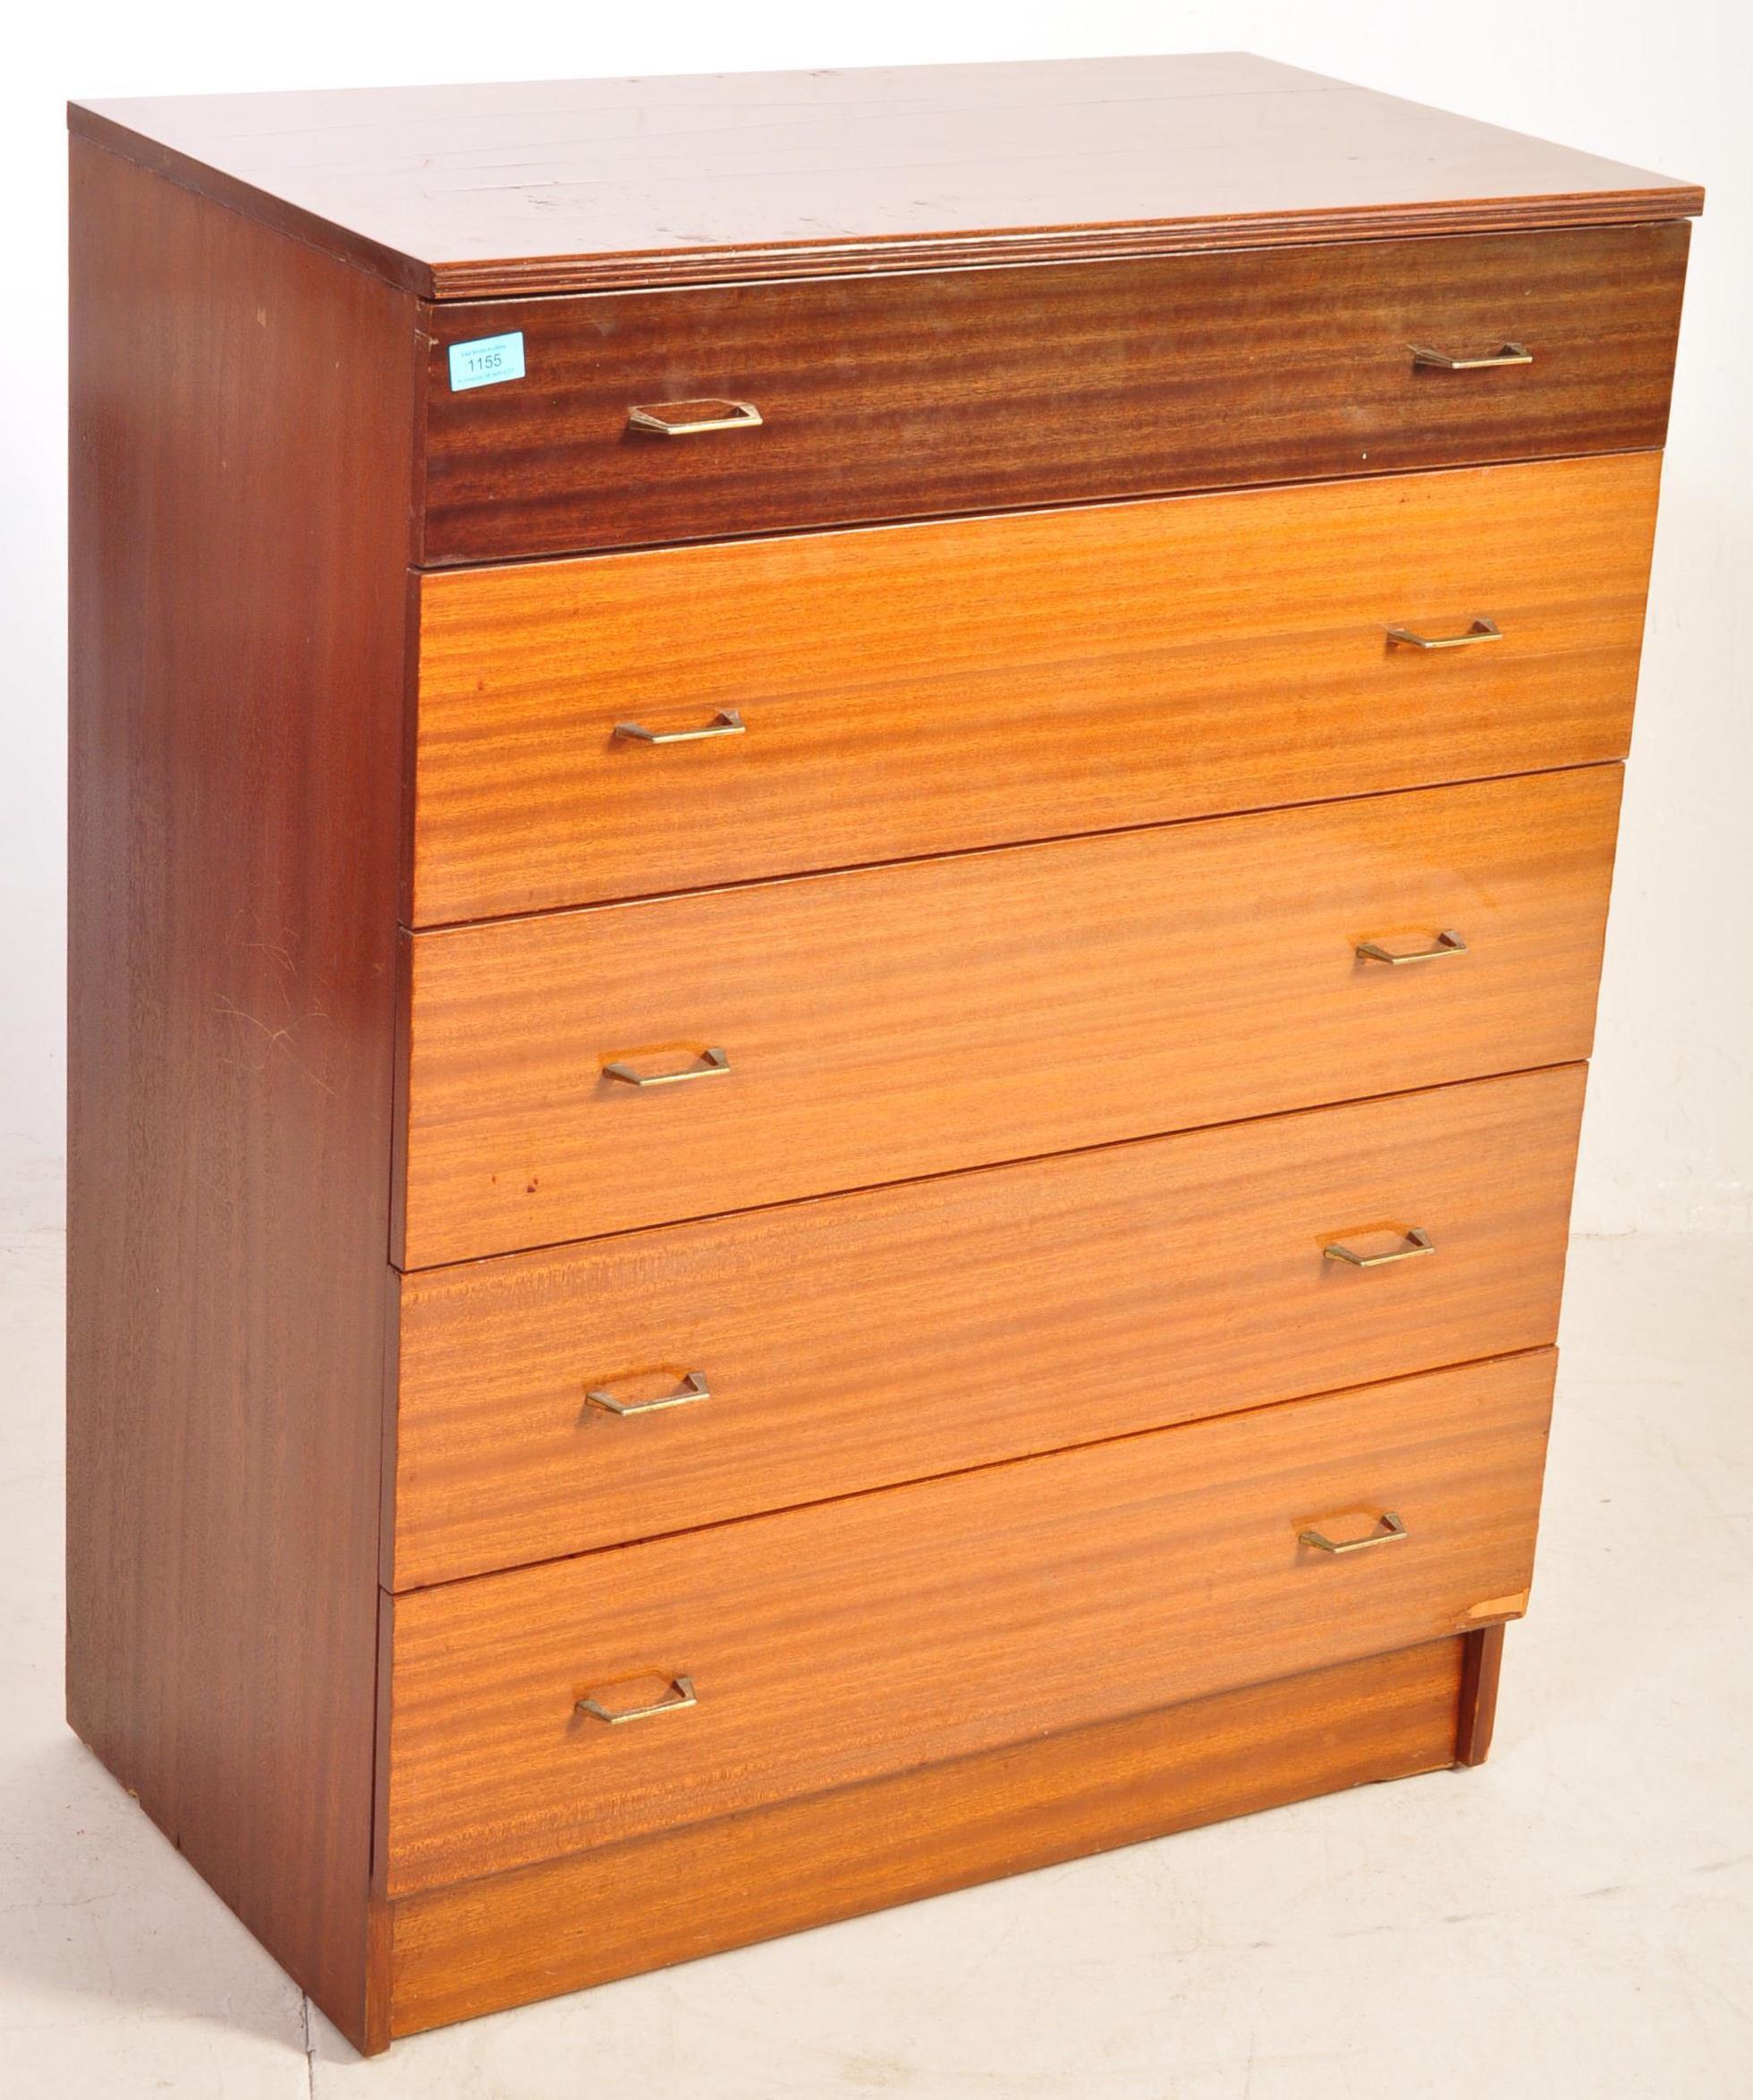 MID CENTURY TEAK WOOD TWO TONE CHEST OF DRAWERS - Image 2 of 8